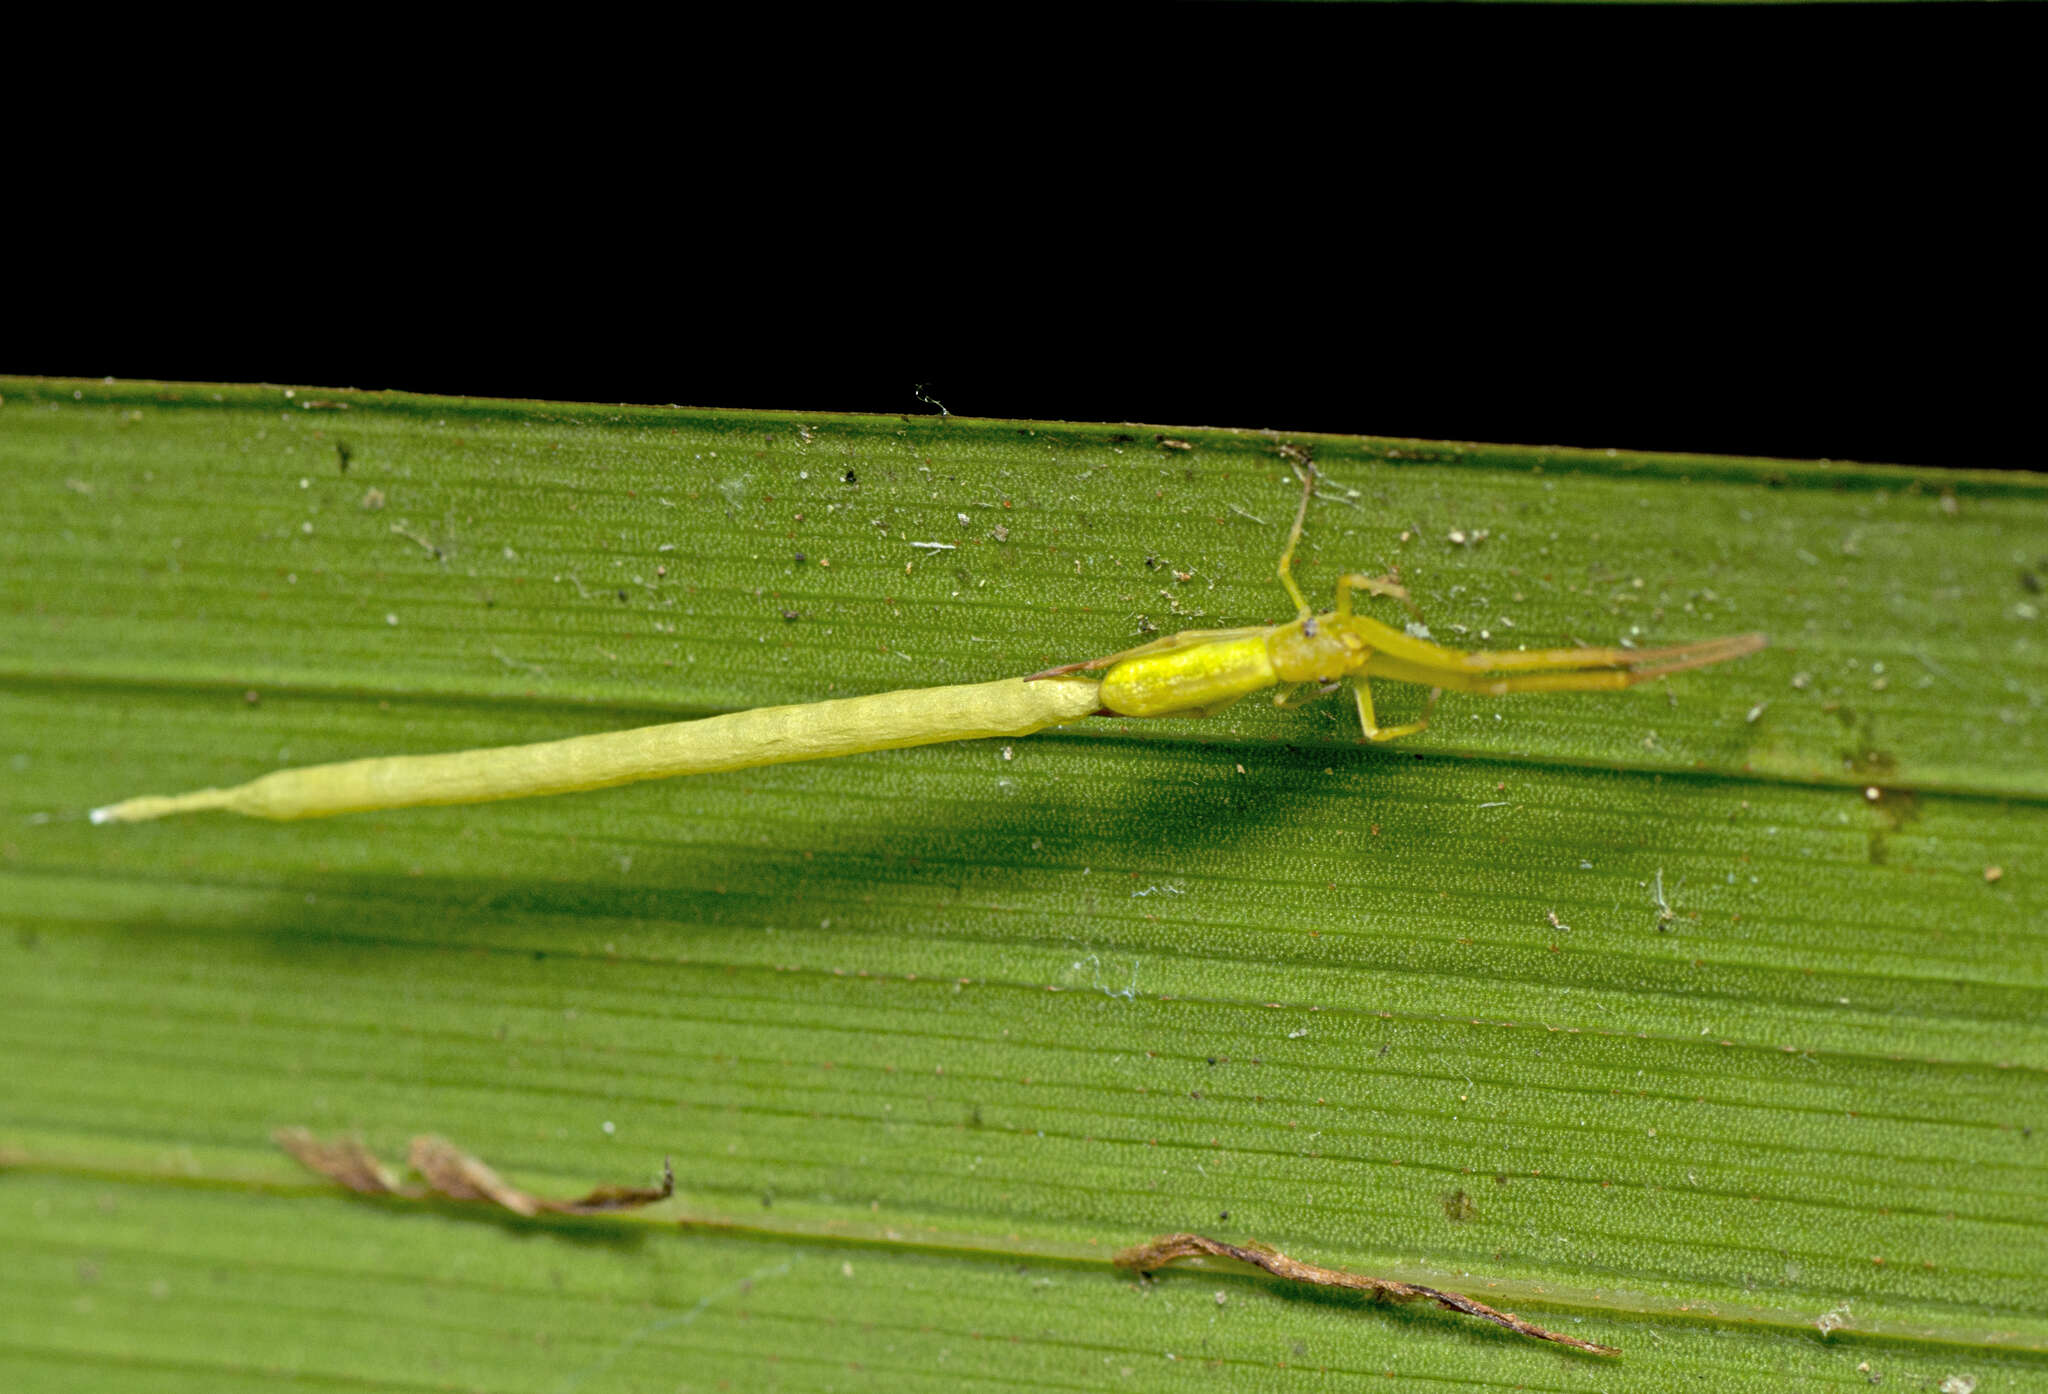 Image of Miagrammopes flavus (Wunderlich 1976)